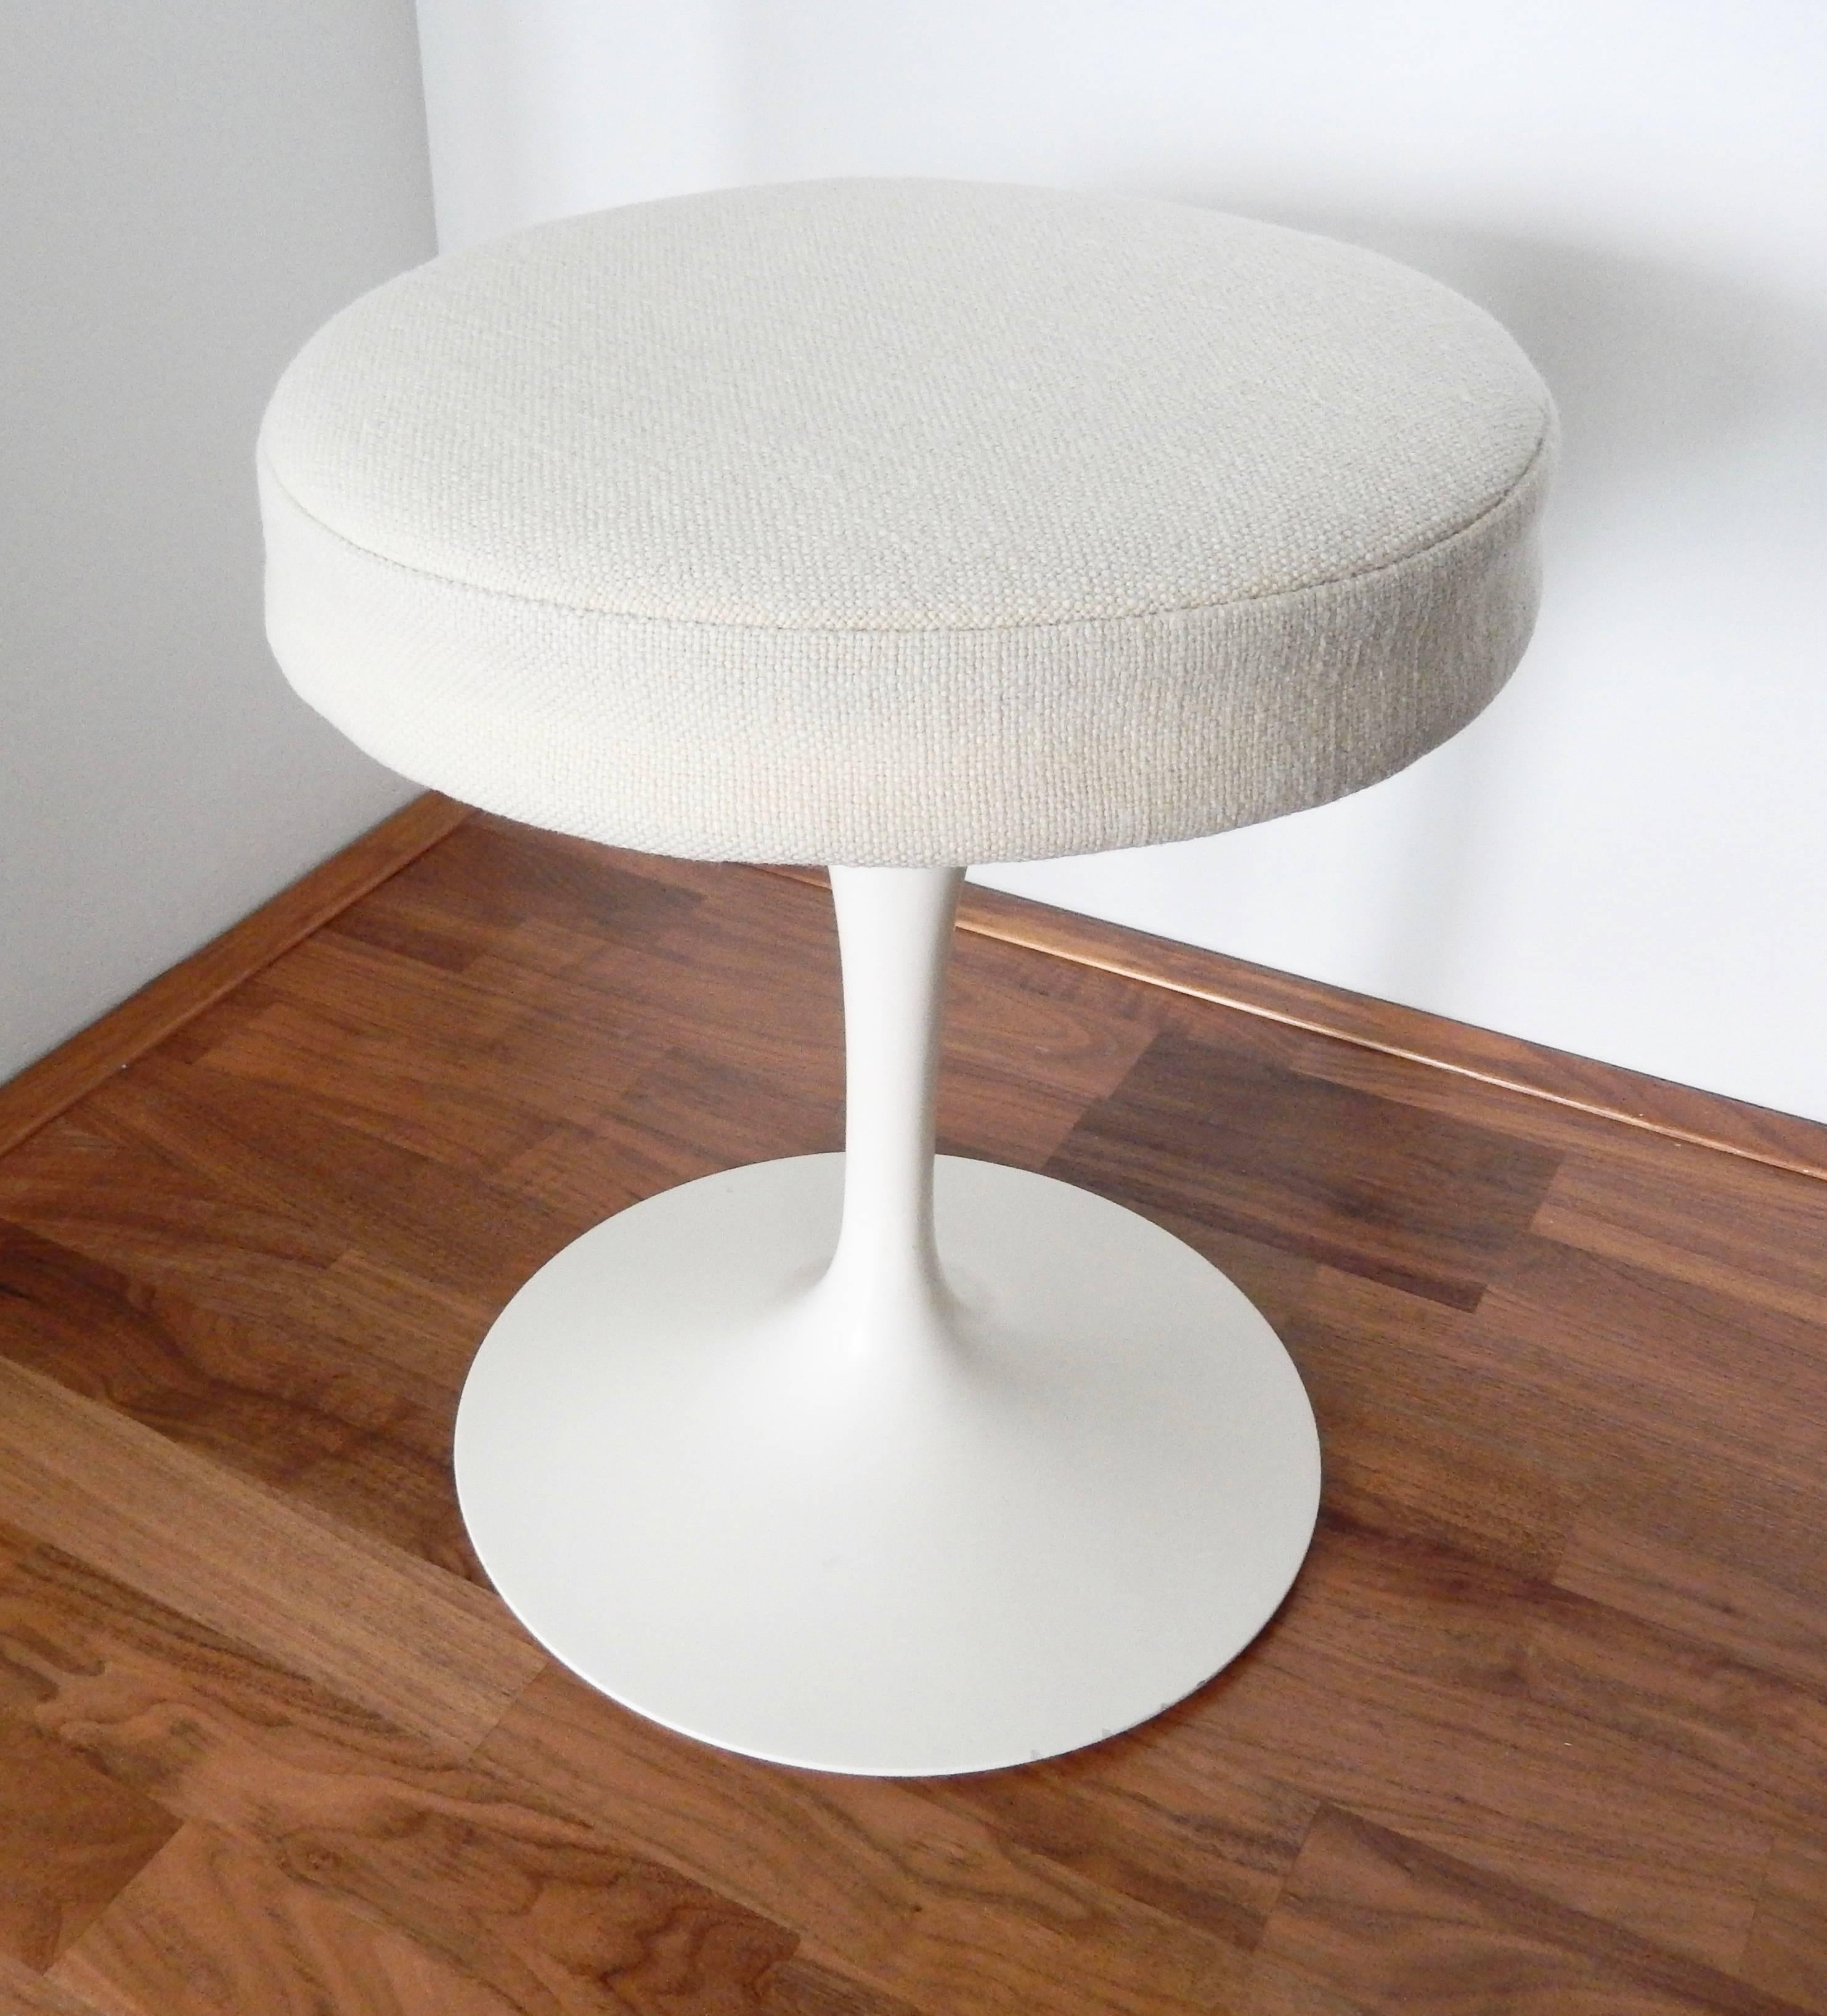 This iconic swivel stool, designed by Eero Saarinen, was first introduced by Knoll in 1958 as part of its Pedestal collection. It has become a modern design Classic. This rare example, with its original white wool Knoll fabric, is in very fine